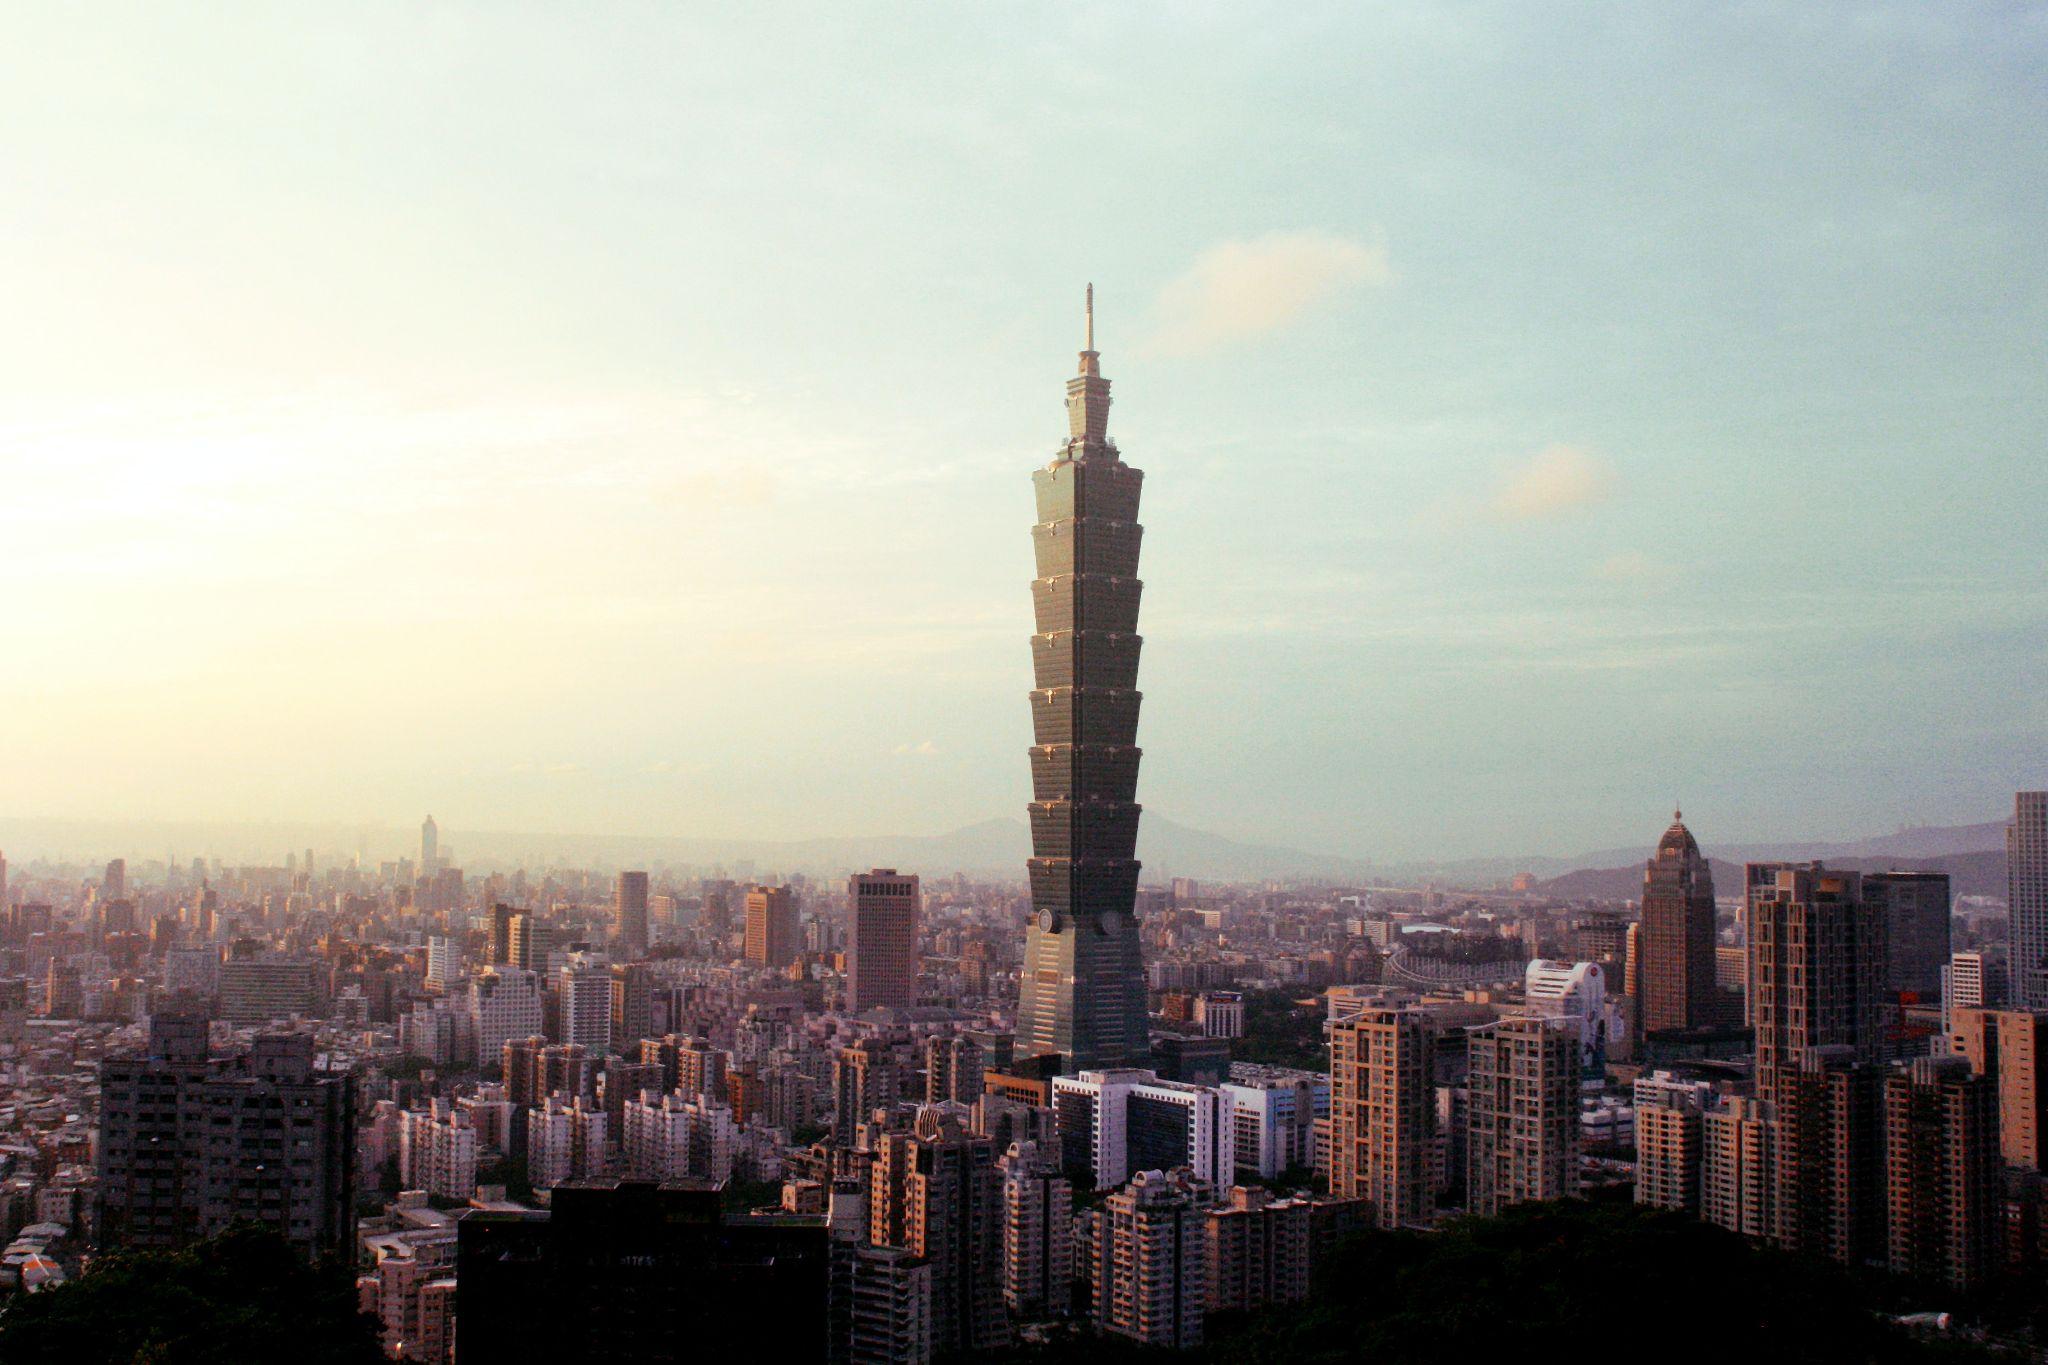 Taipei 101: How does this iconic skyscraper withstand earthquakes?